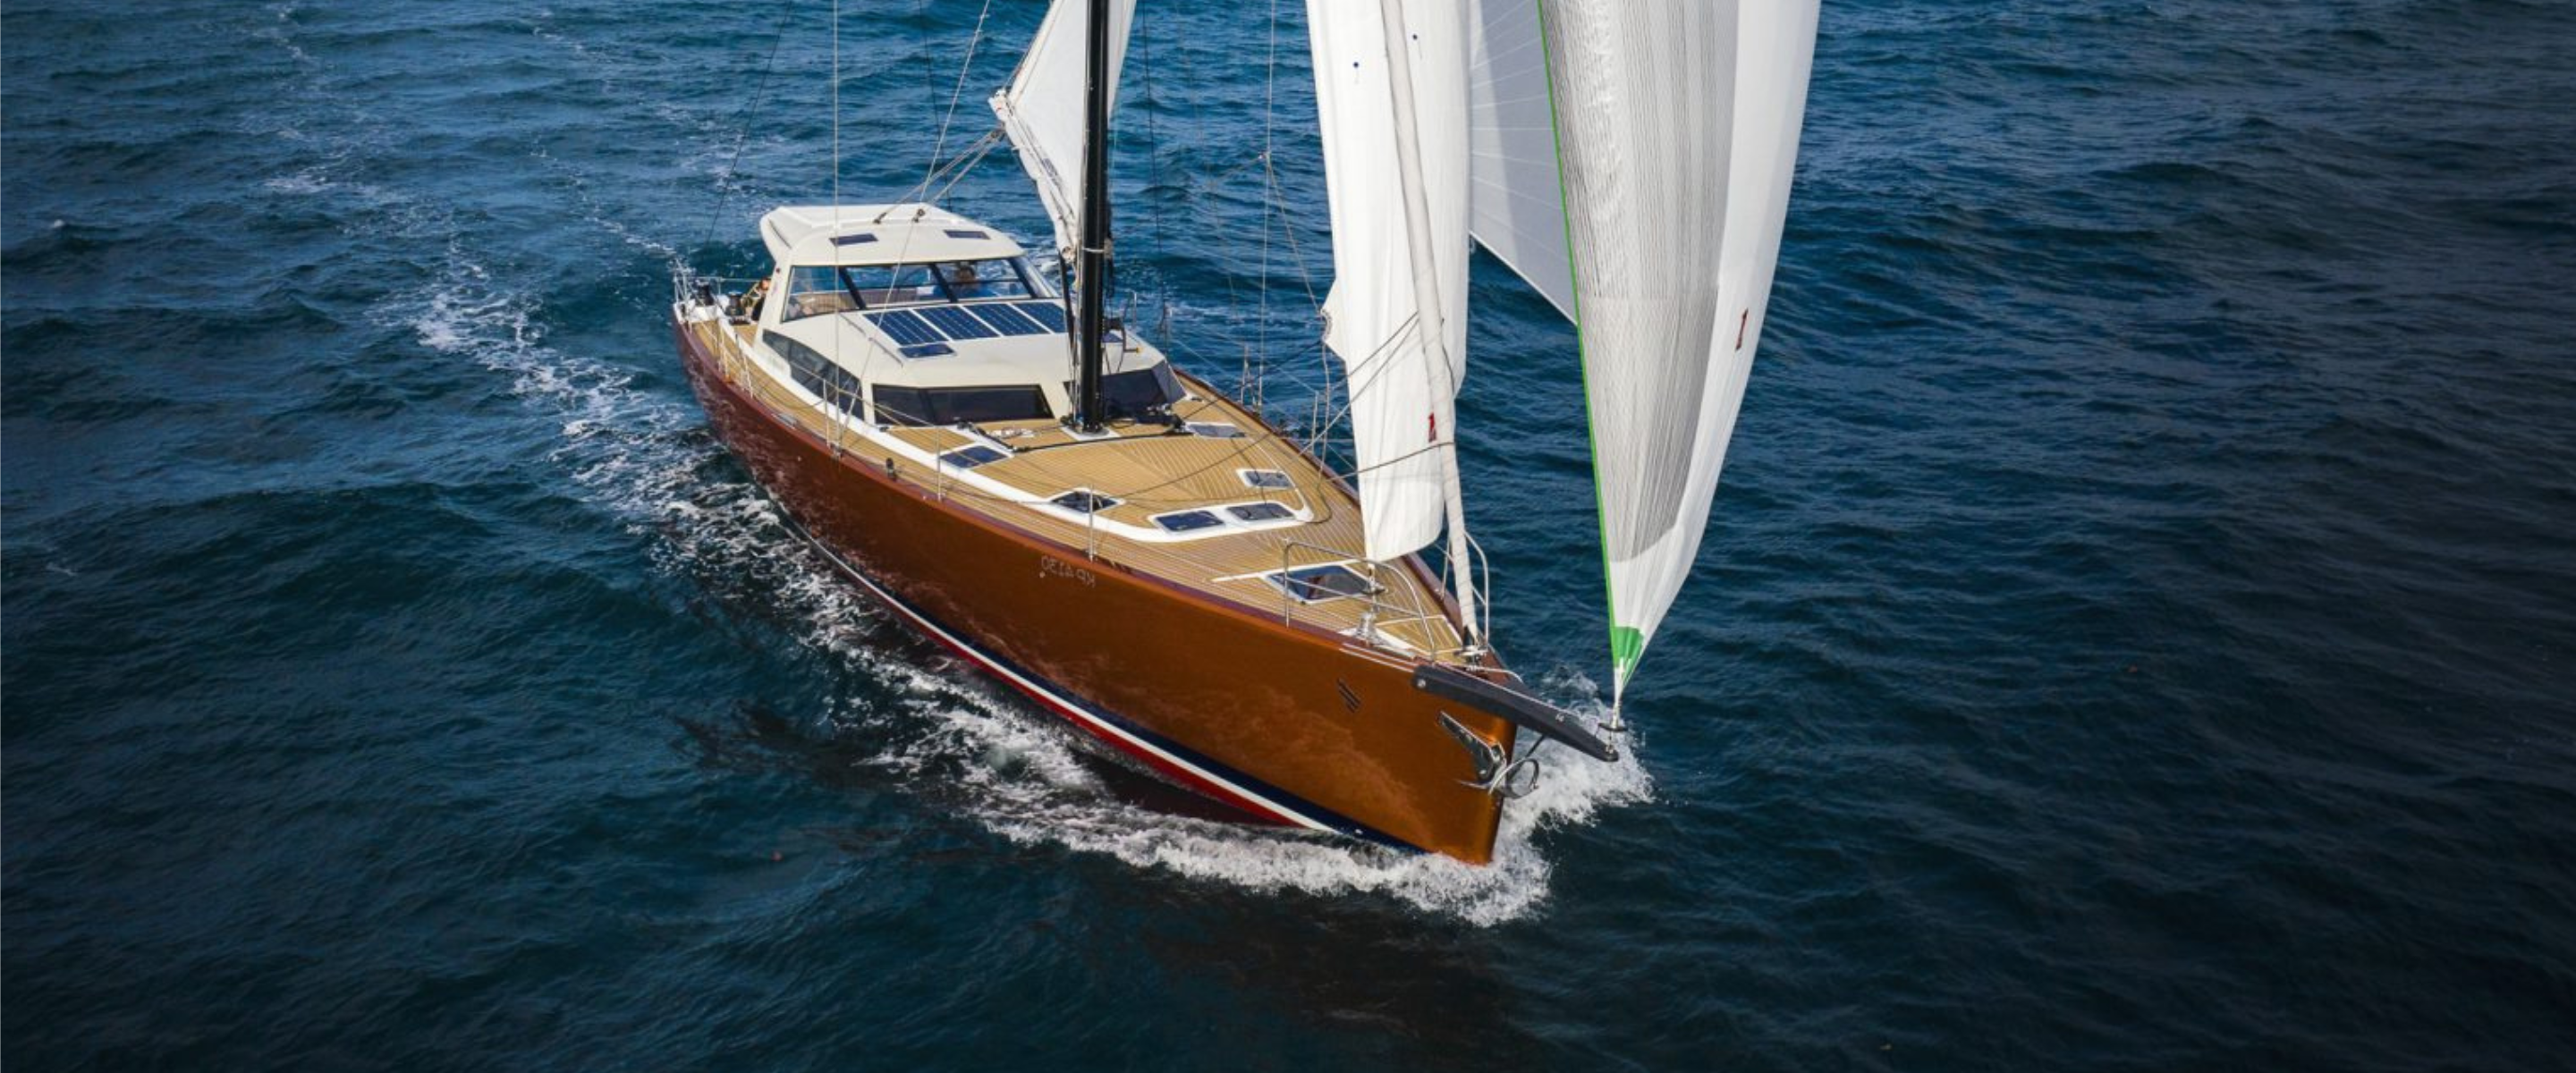 Pegasus Yachts fitted with Flexiteek - What our customers say